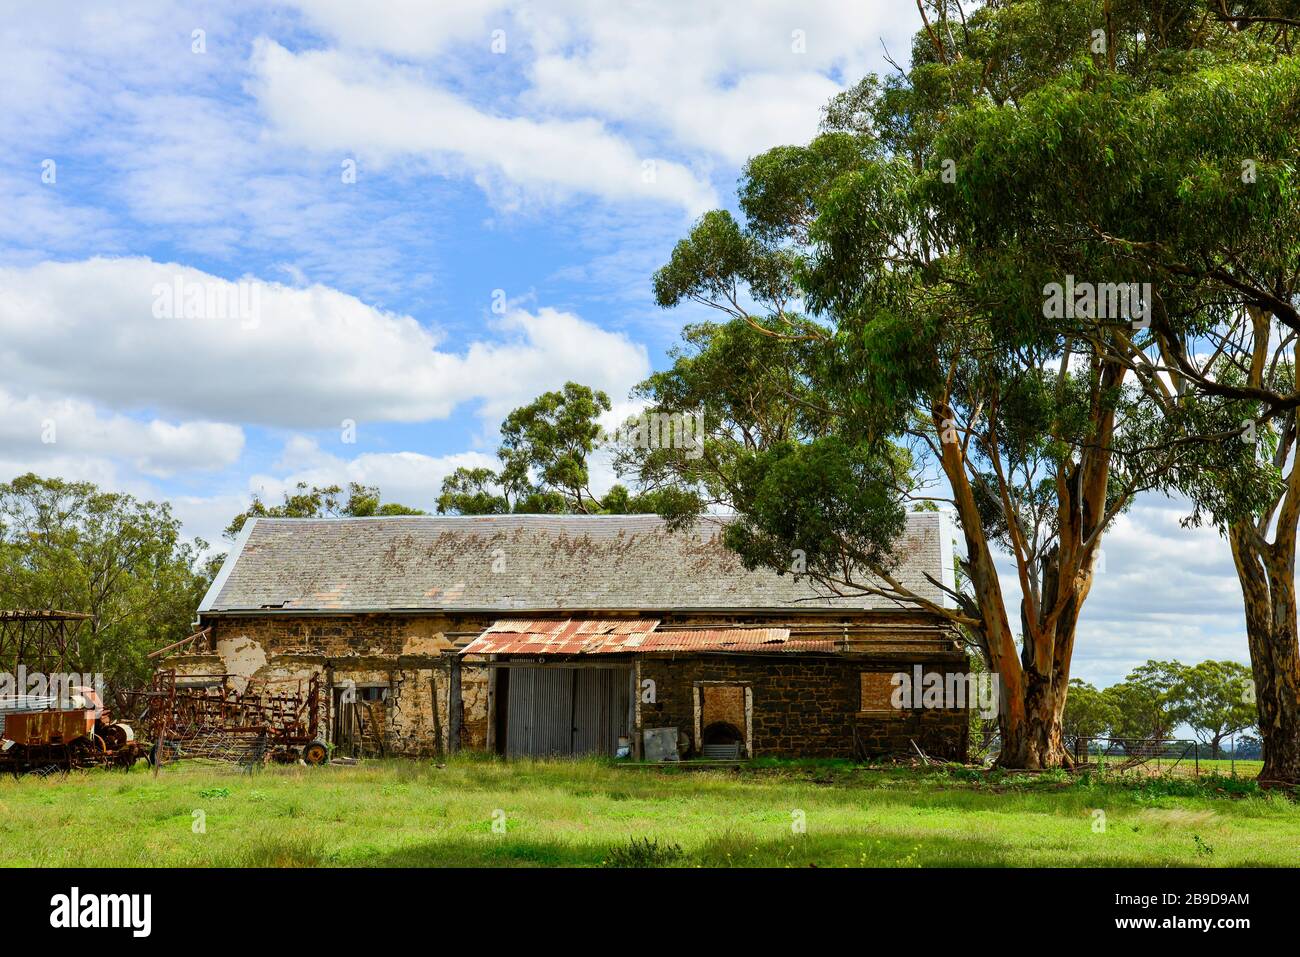 Old Stone Farmhouse in Disrepair Under Tree with Old Machinery Stock Photo